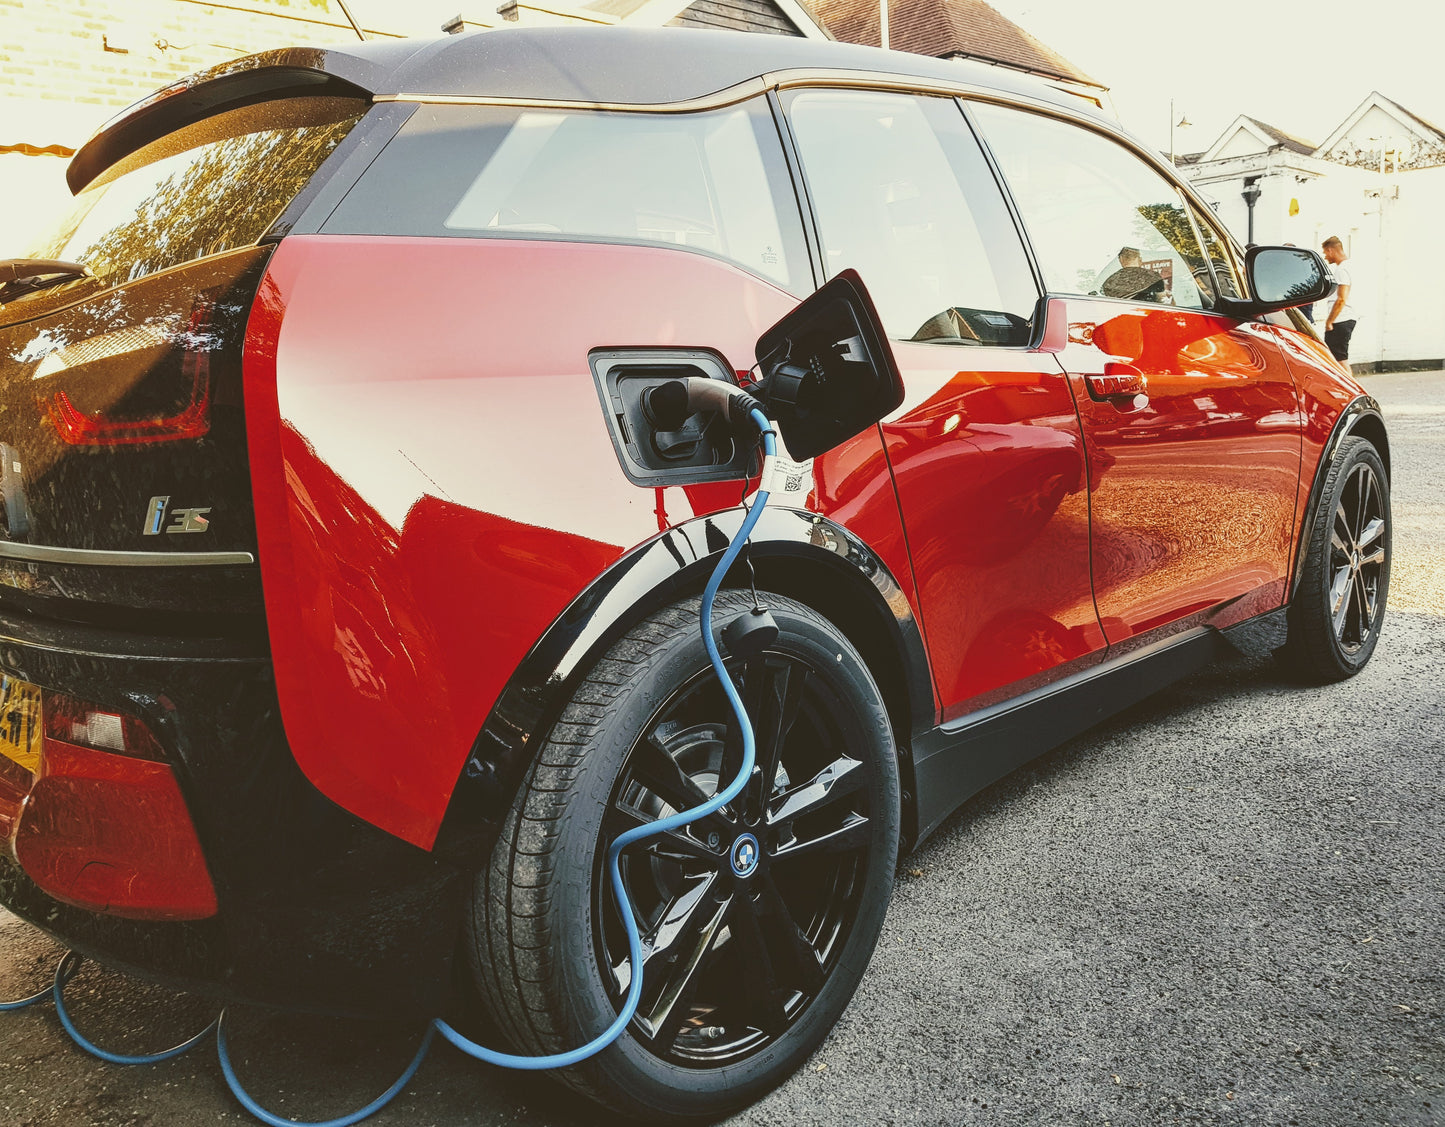 BMW i3s on Charge .  Blue cable being used to charge a red car on gravel with a building in the background